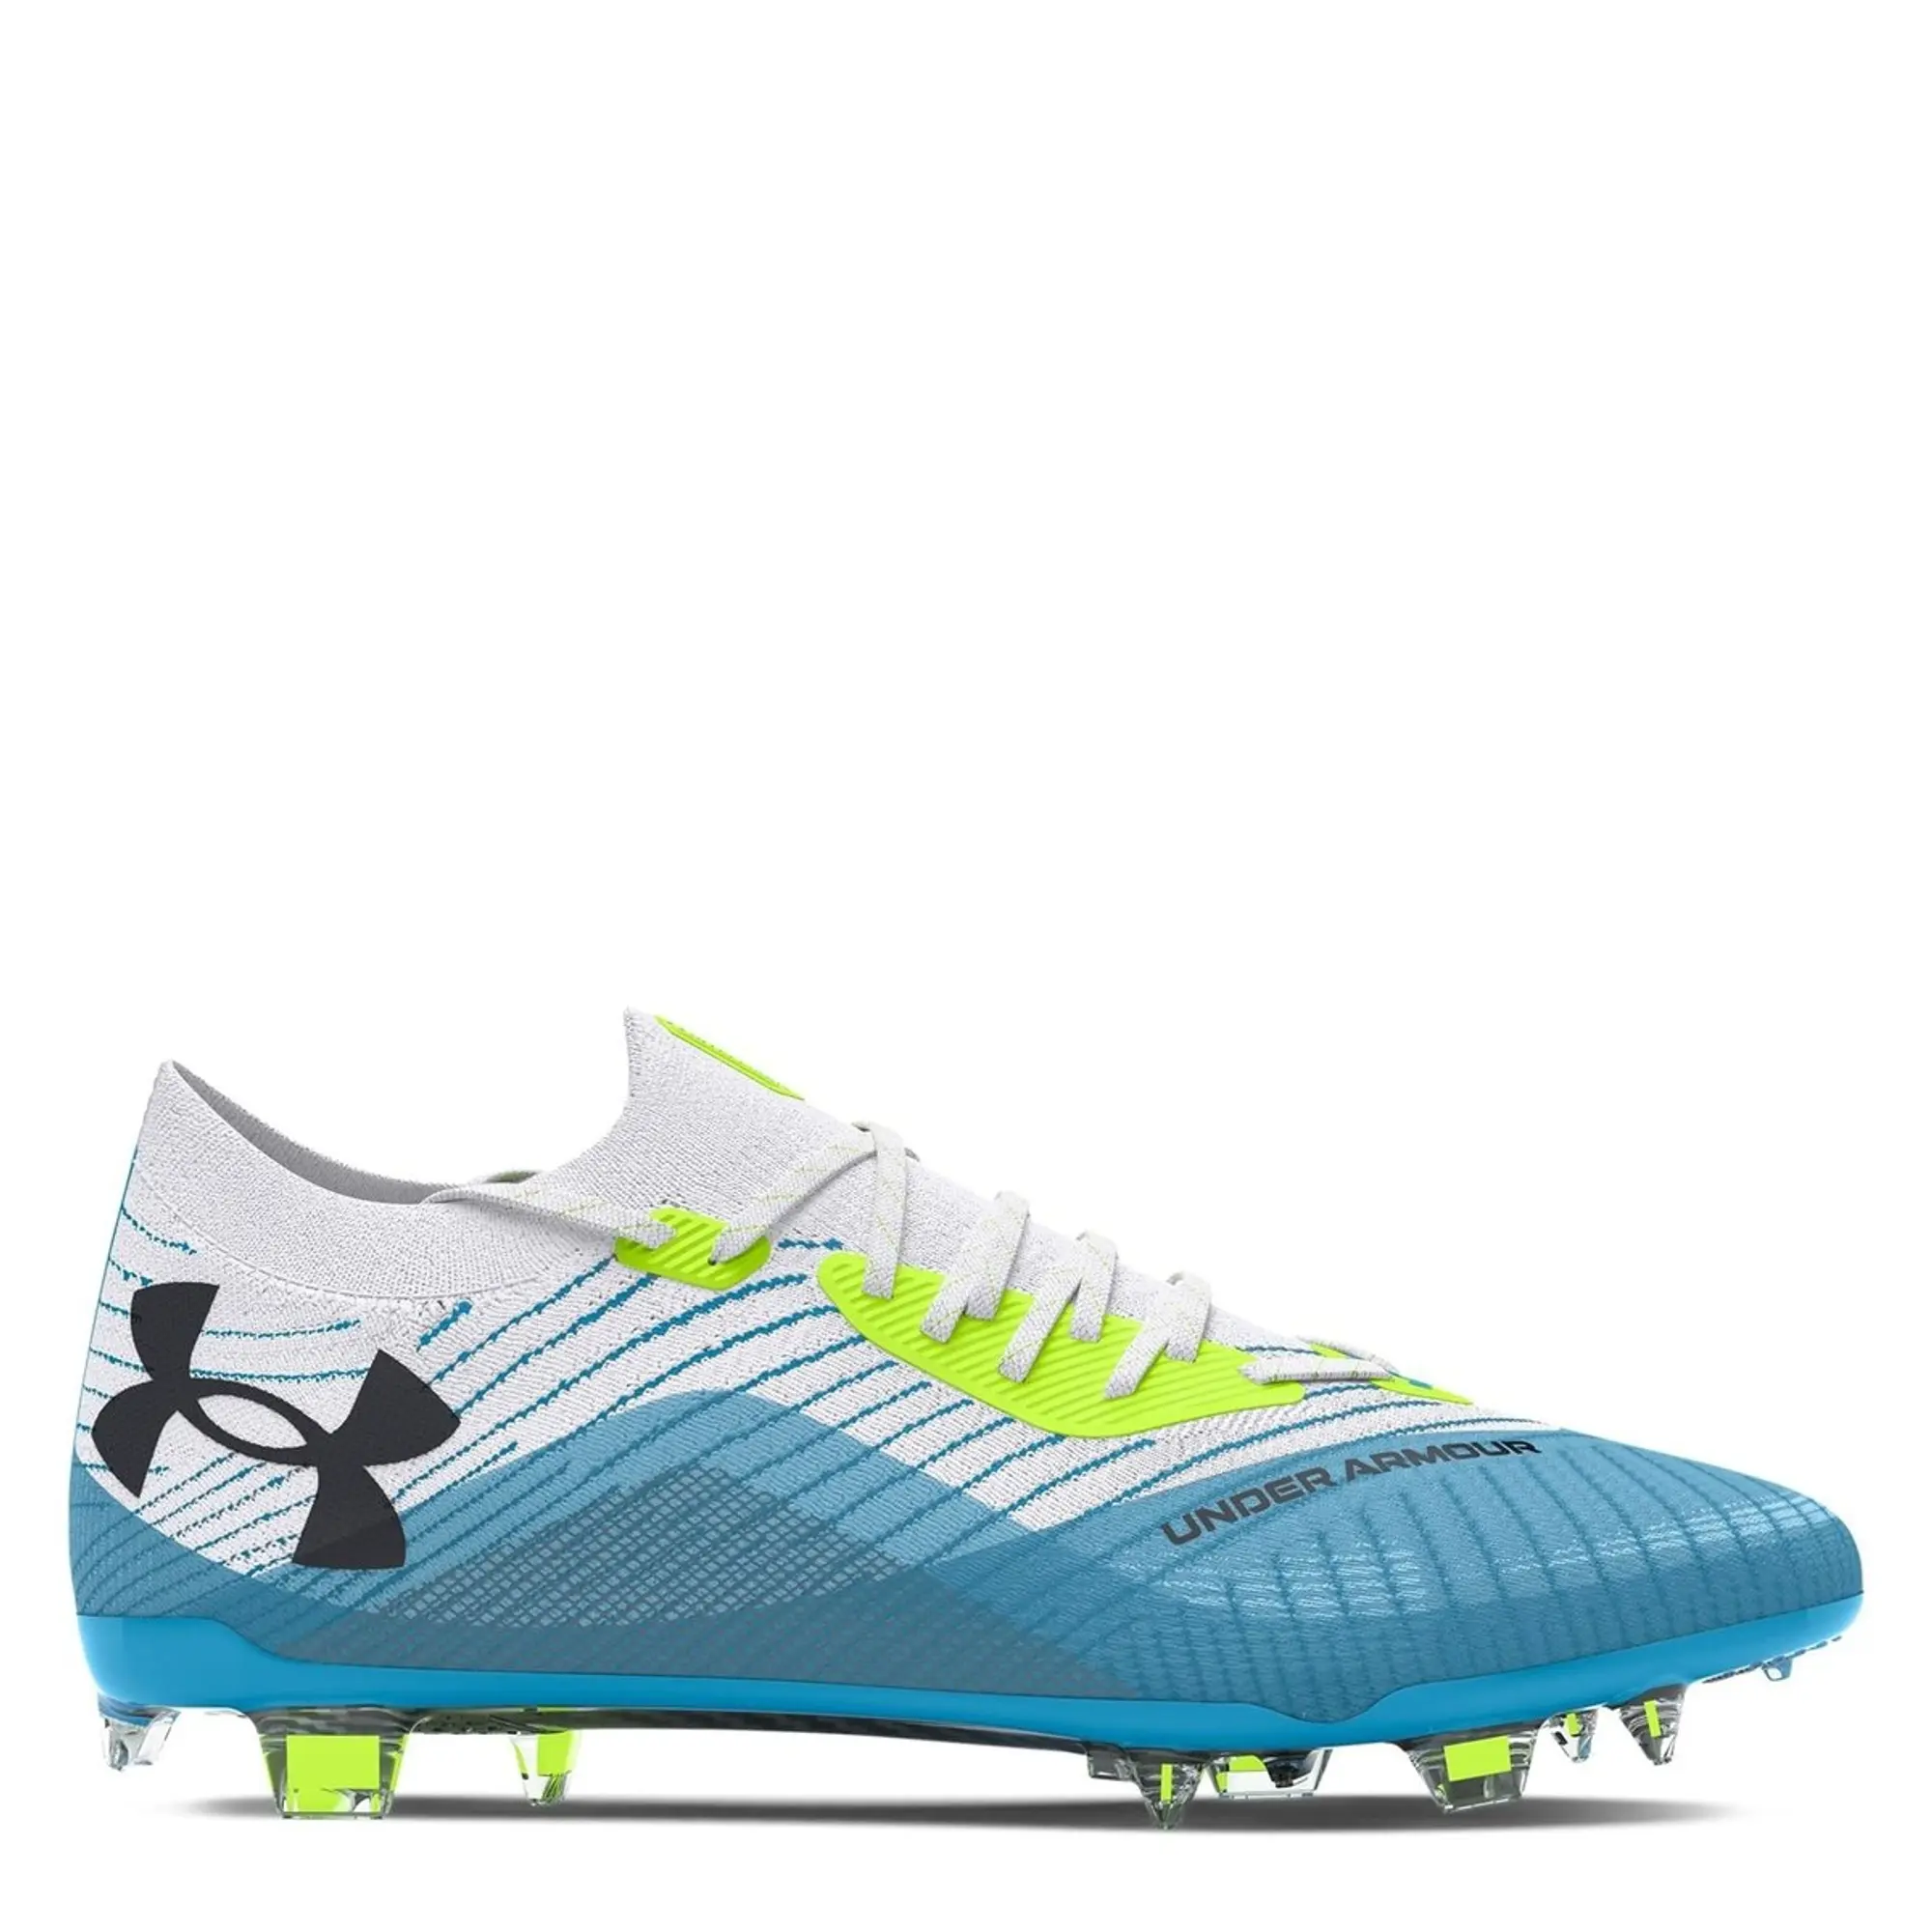 Under Armour Armour Shadow Elite 2 Firm Ground Football Boots